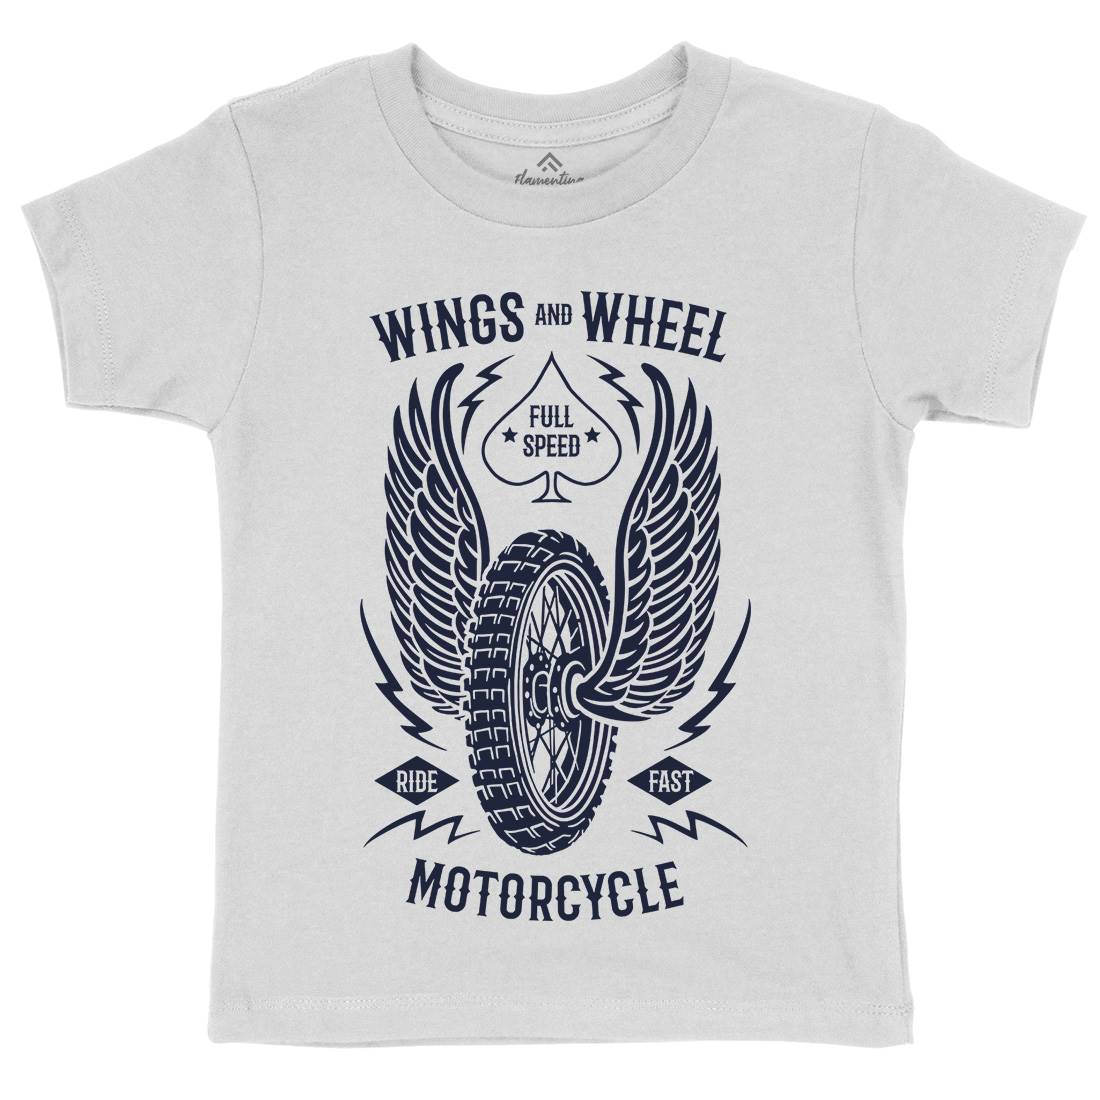 Wings And Wheel Kids Crew Neck T-Shirt Motorcycles B272